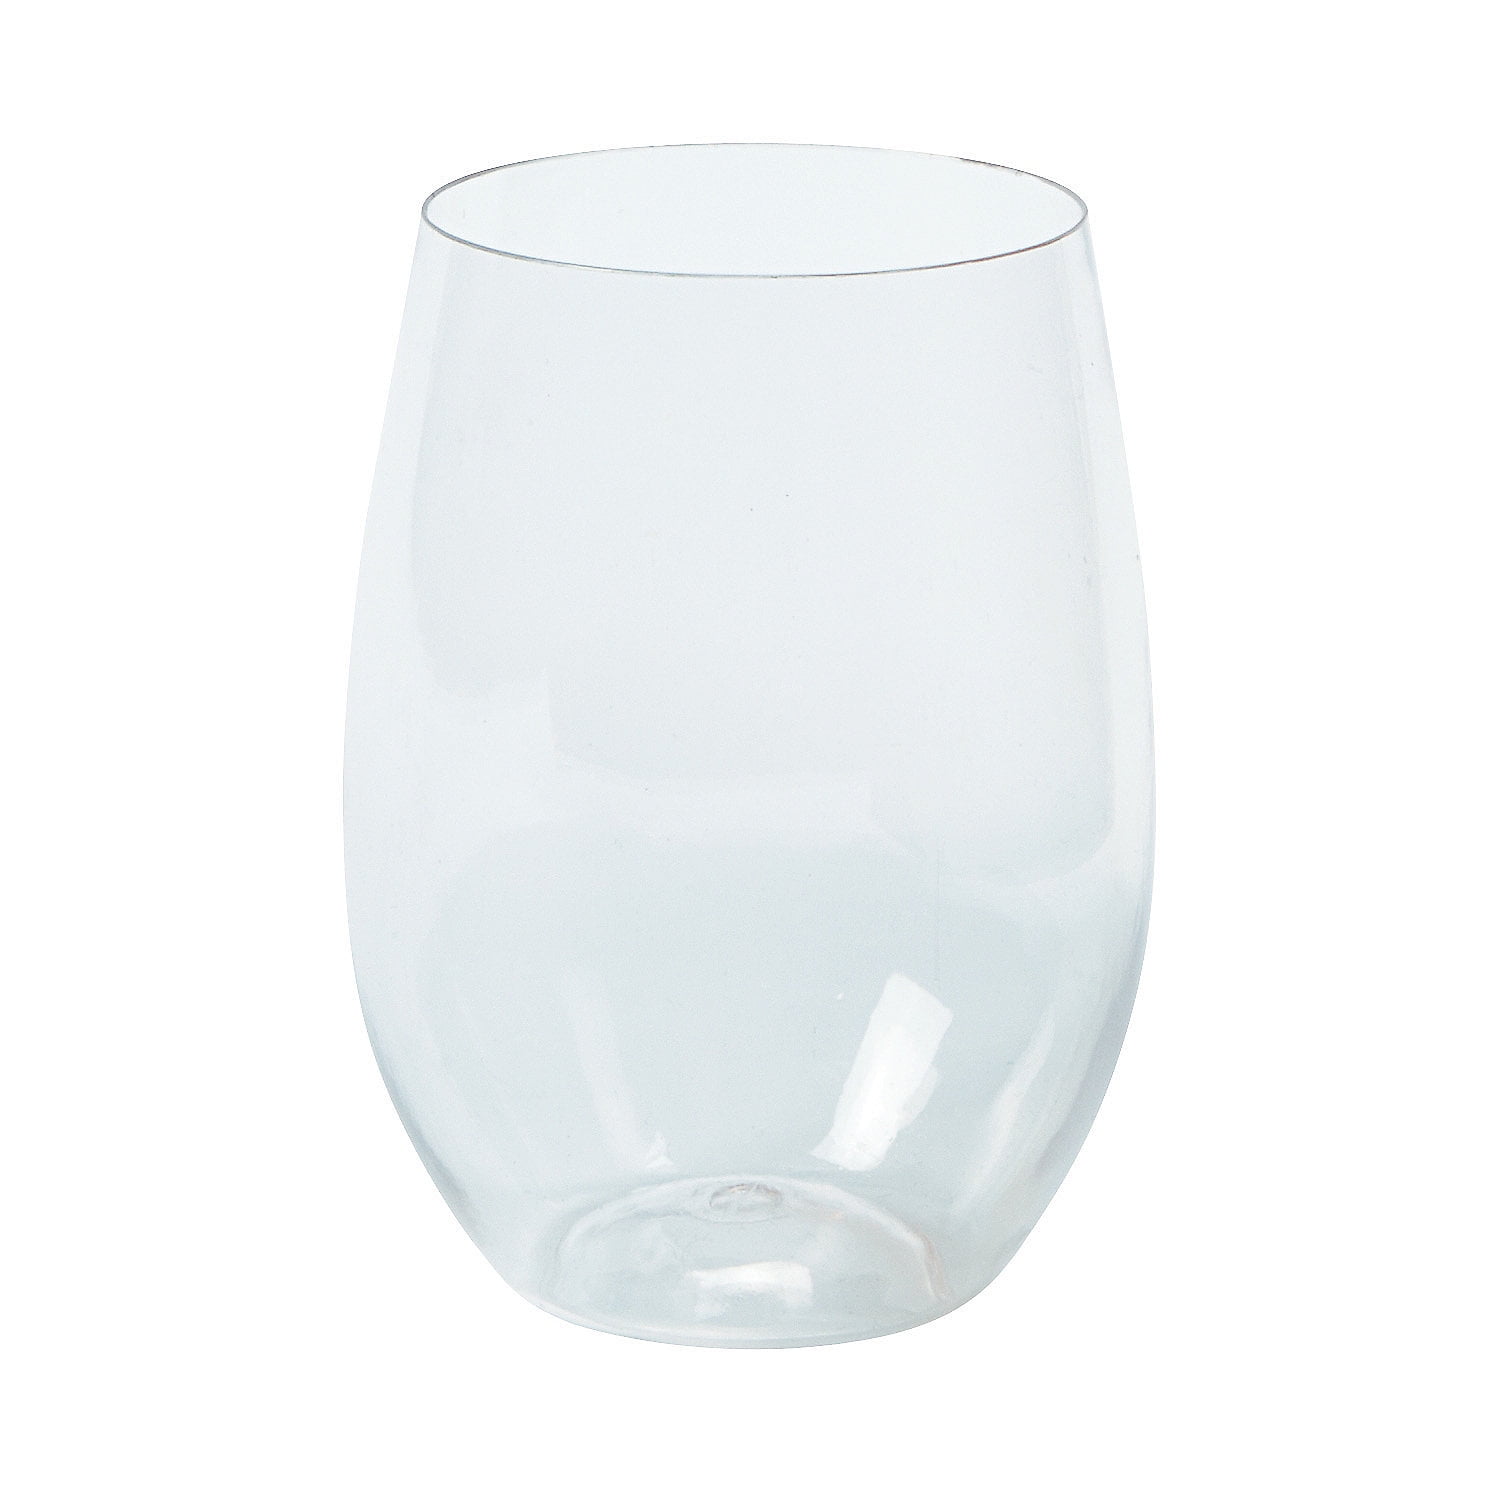 Set of 10 Clear Flexible and 16oz for sale online Plastic Stemless Wine Glasses by En SOIREE 